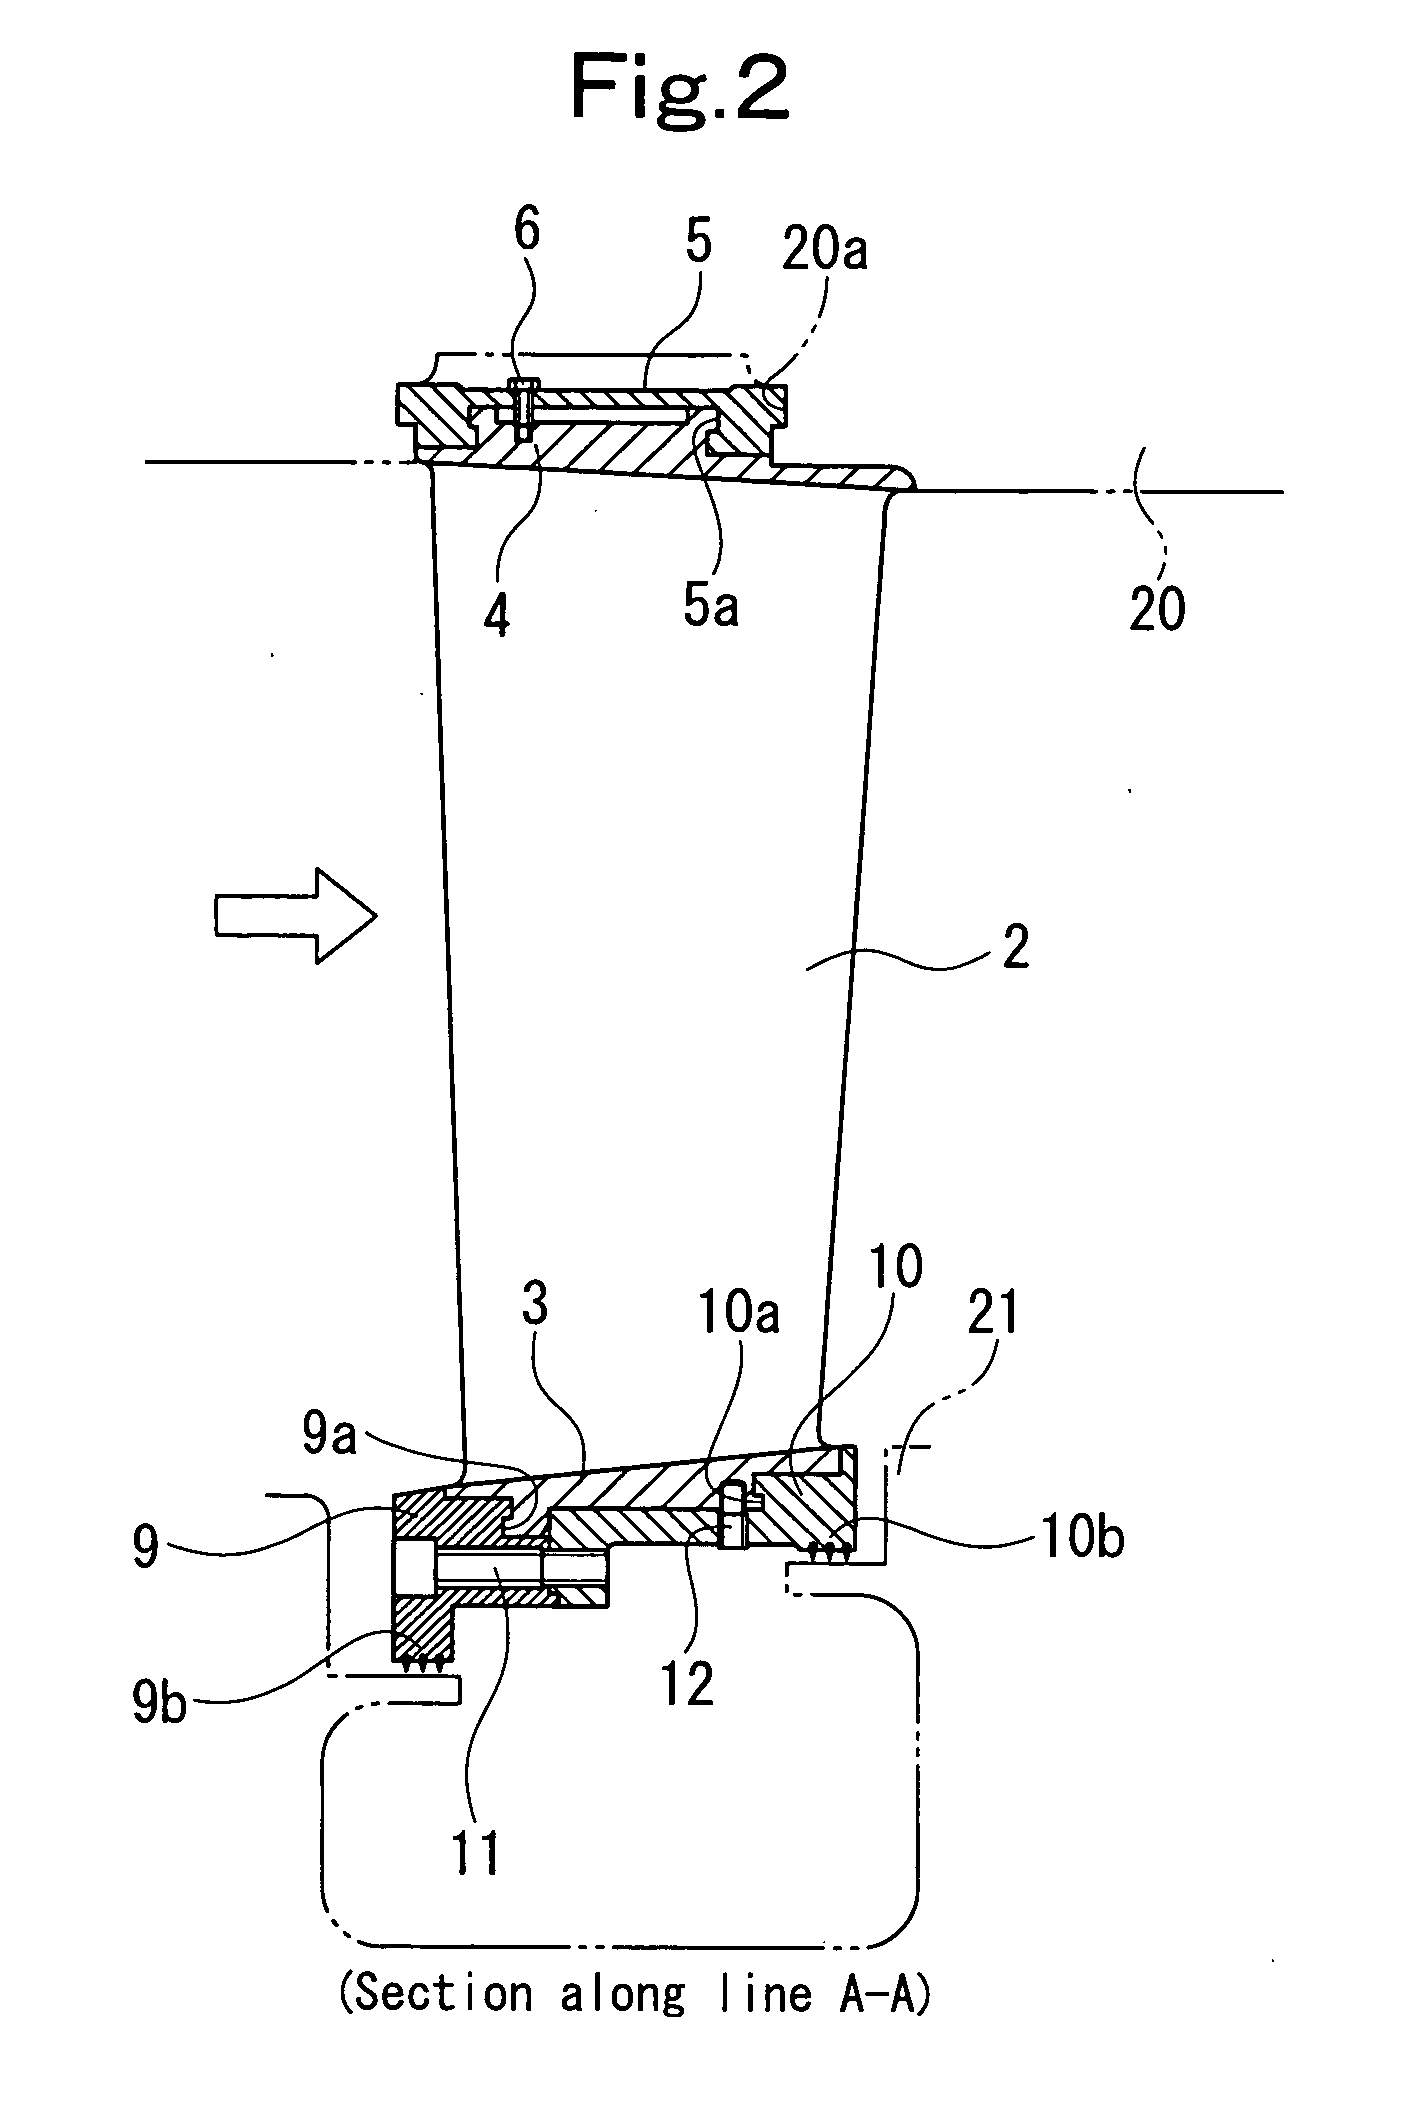 Stationary blade ring of axial compressor